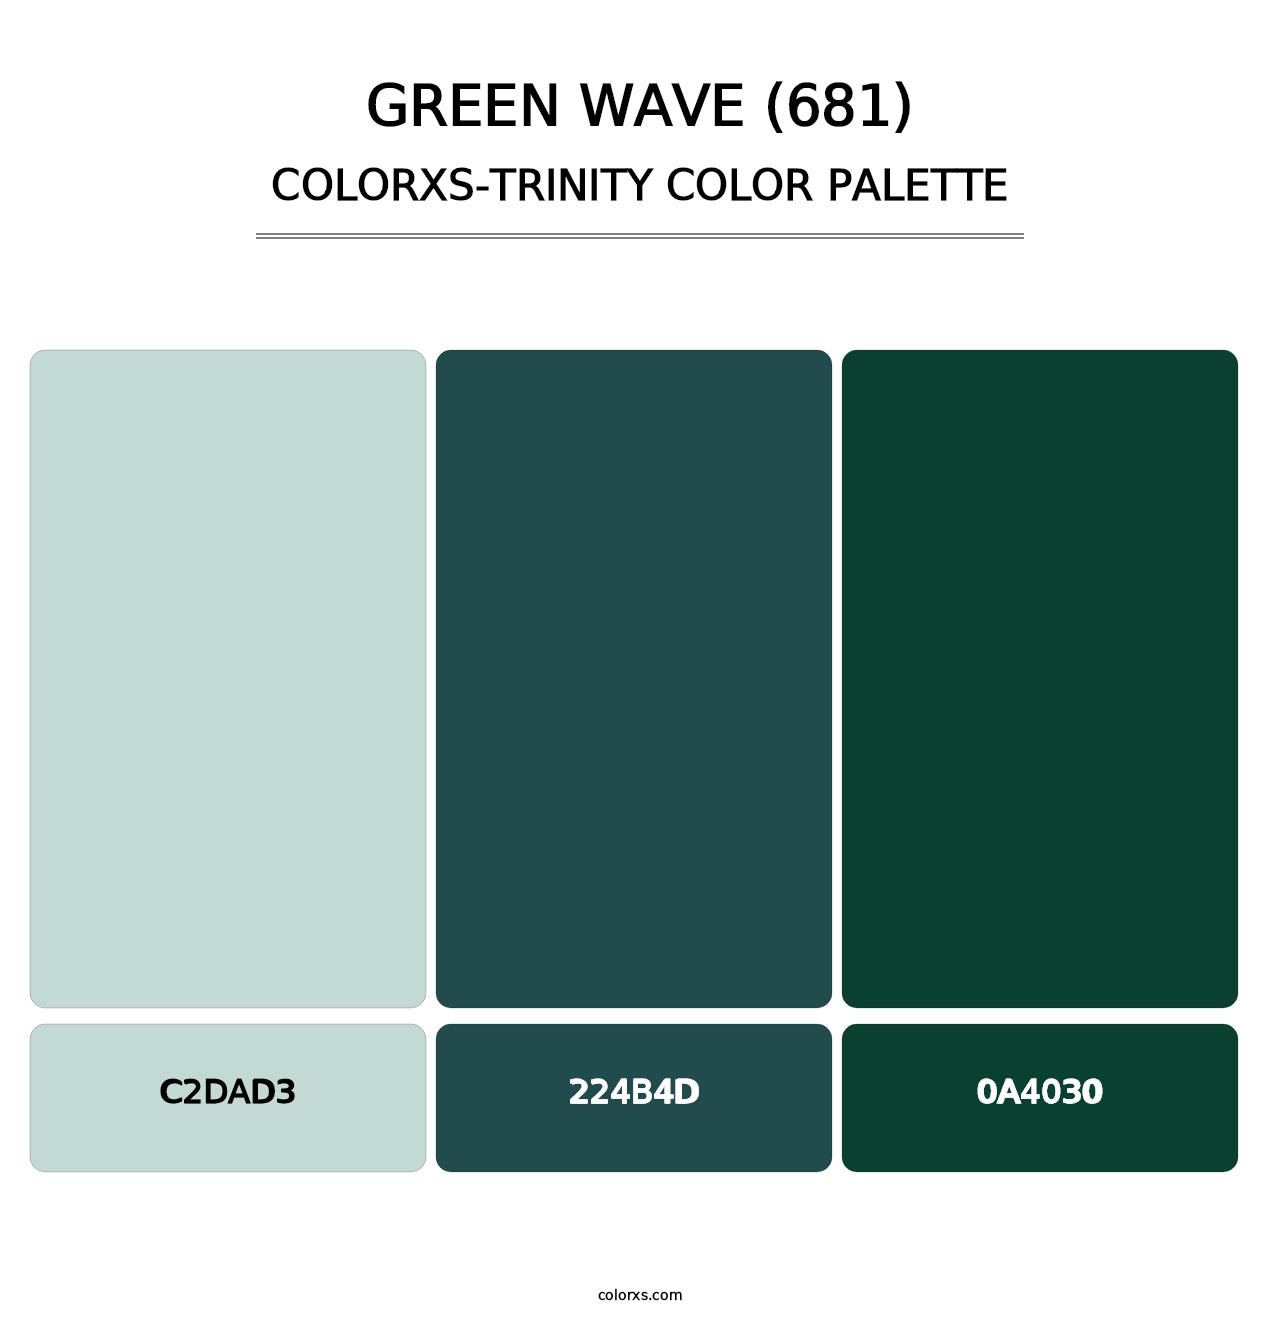 Green Wave (681) - Colorxs Trinity Palette